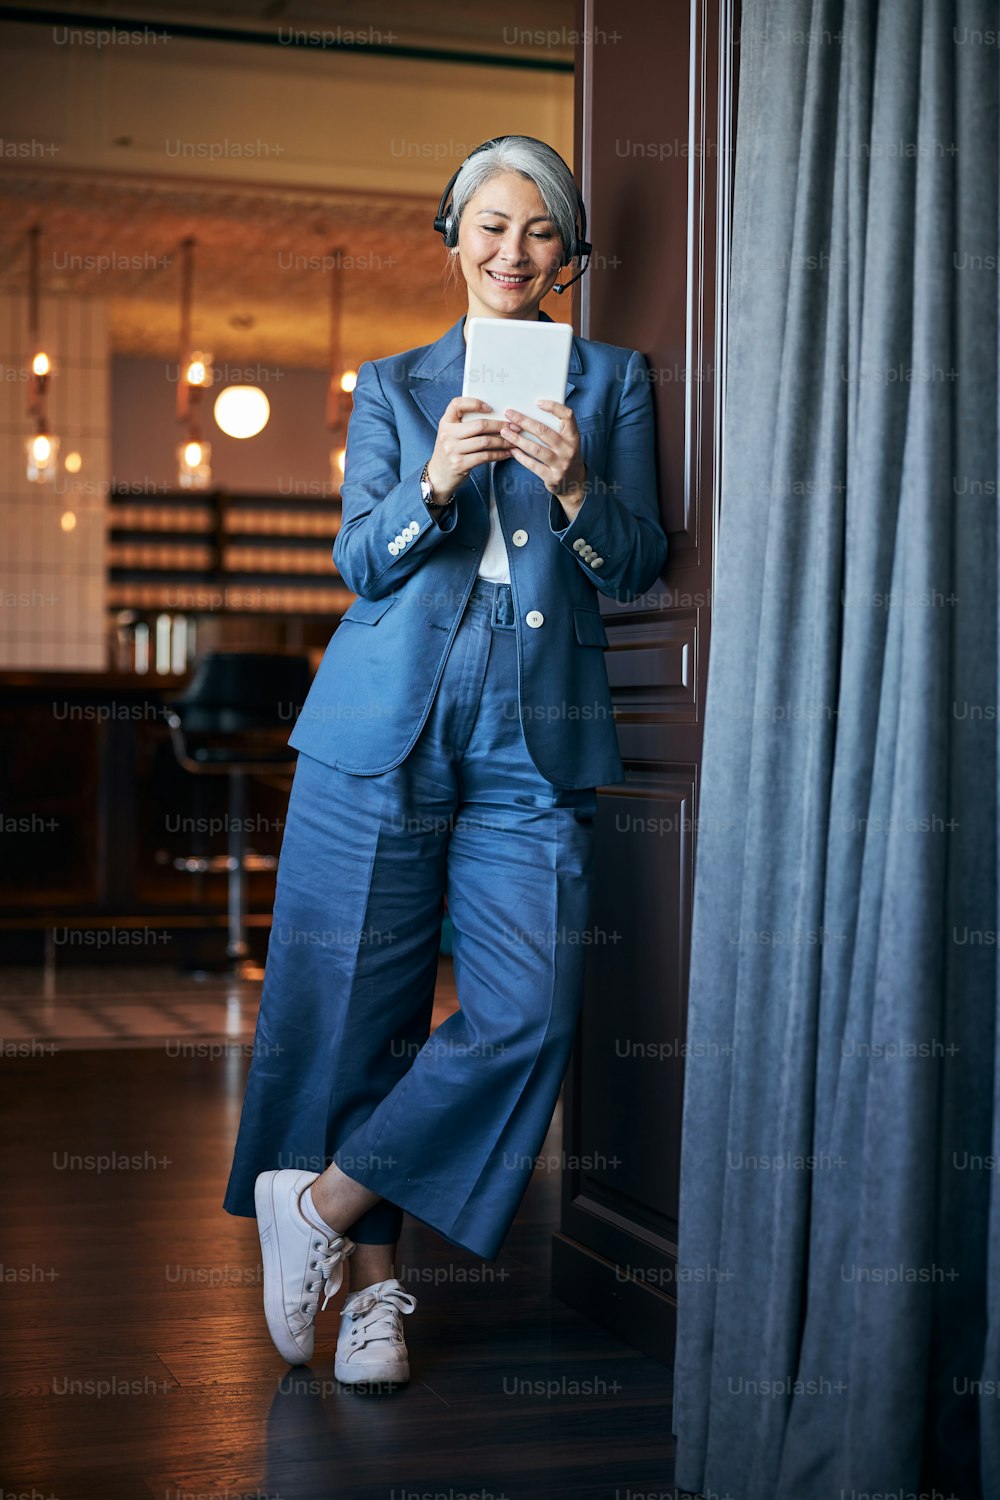 Beautiful lady in elegant suit holding tablet computer and smiling while leaning on the door